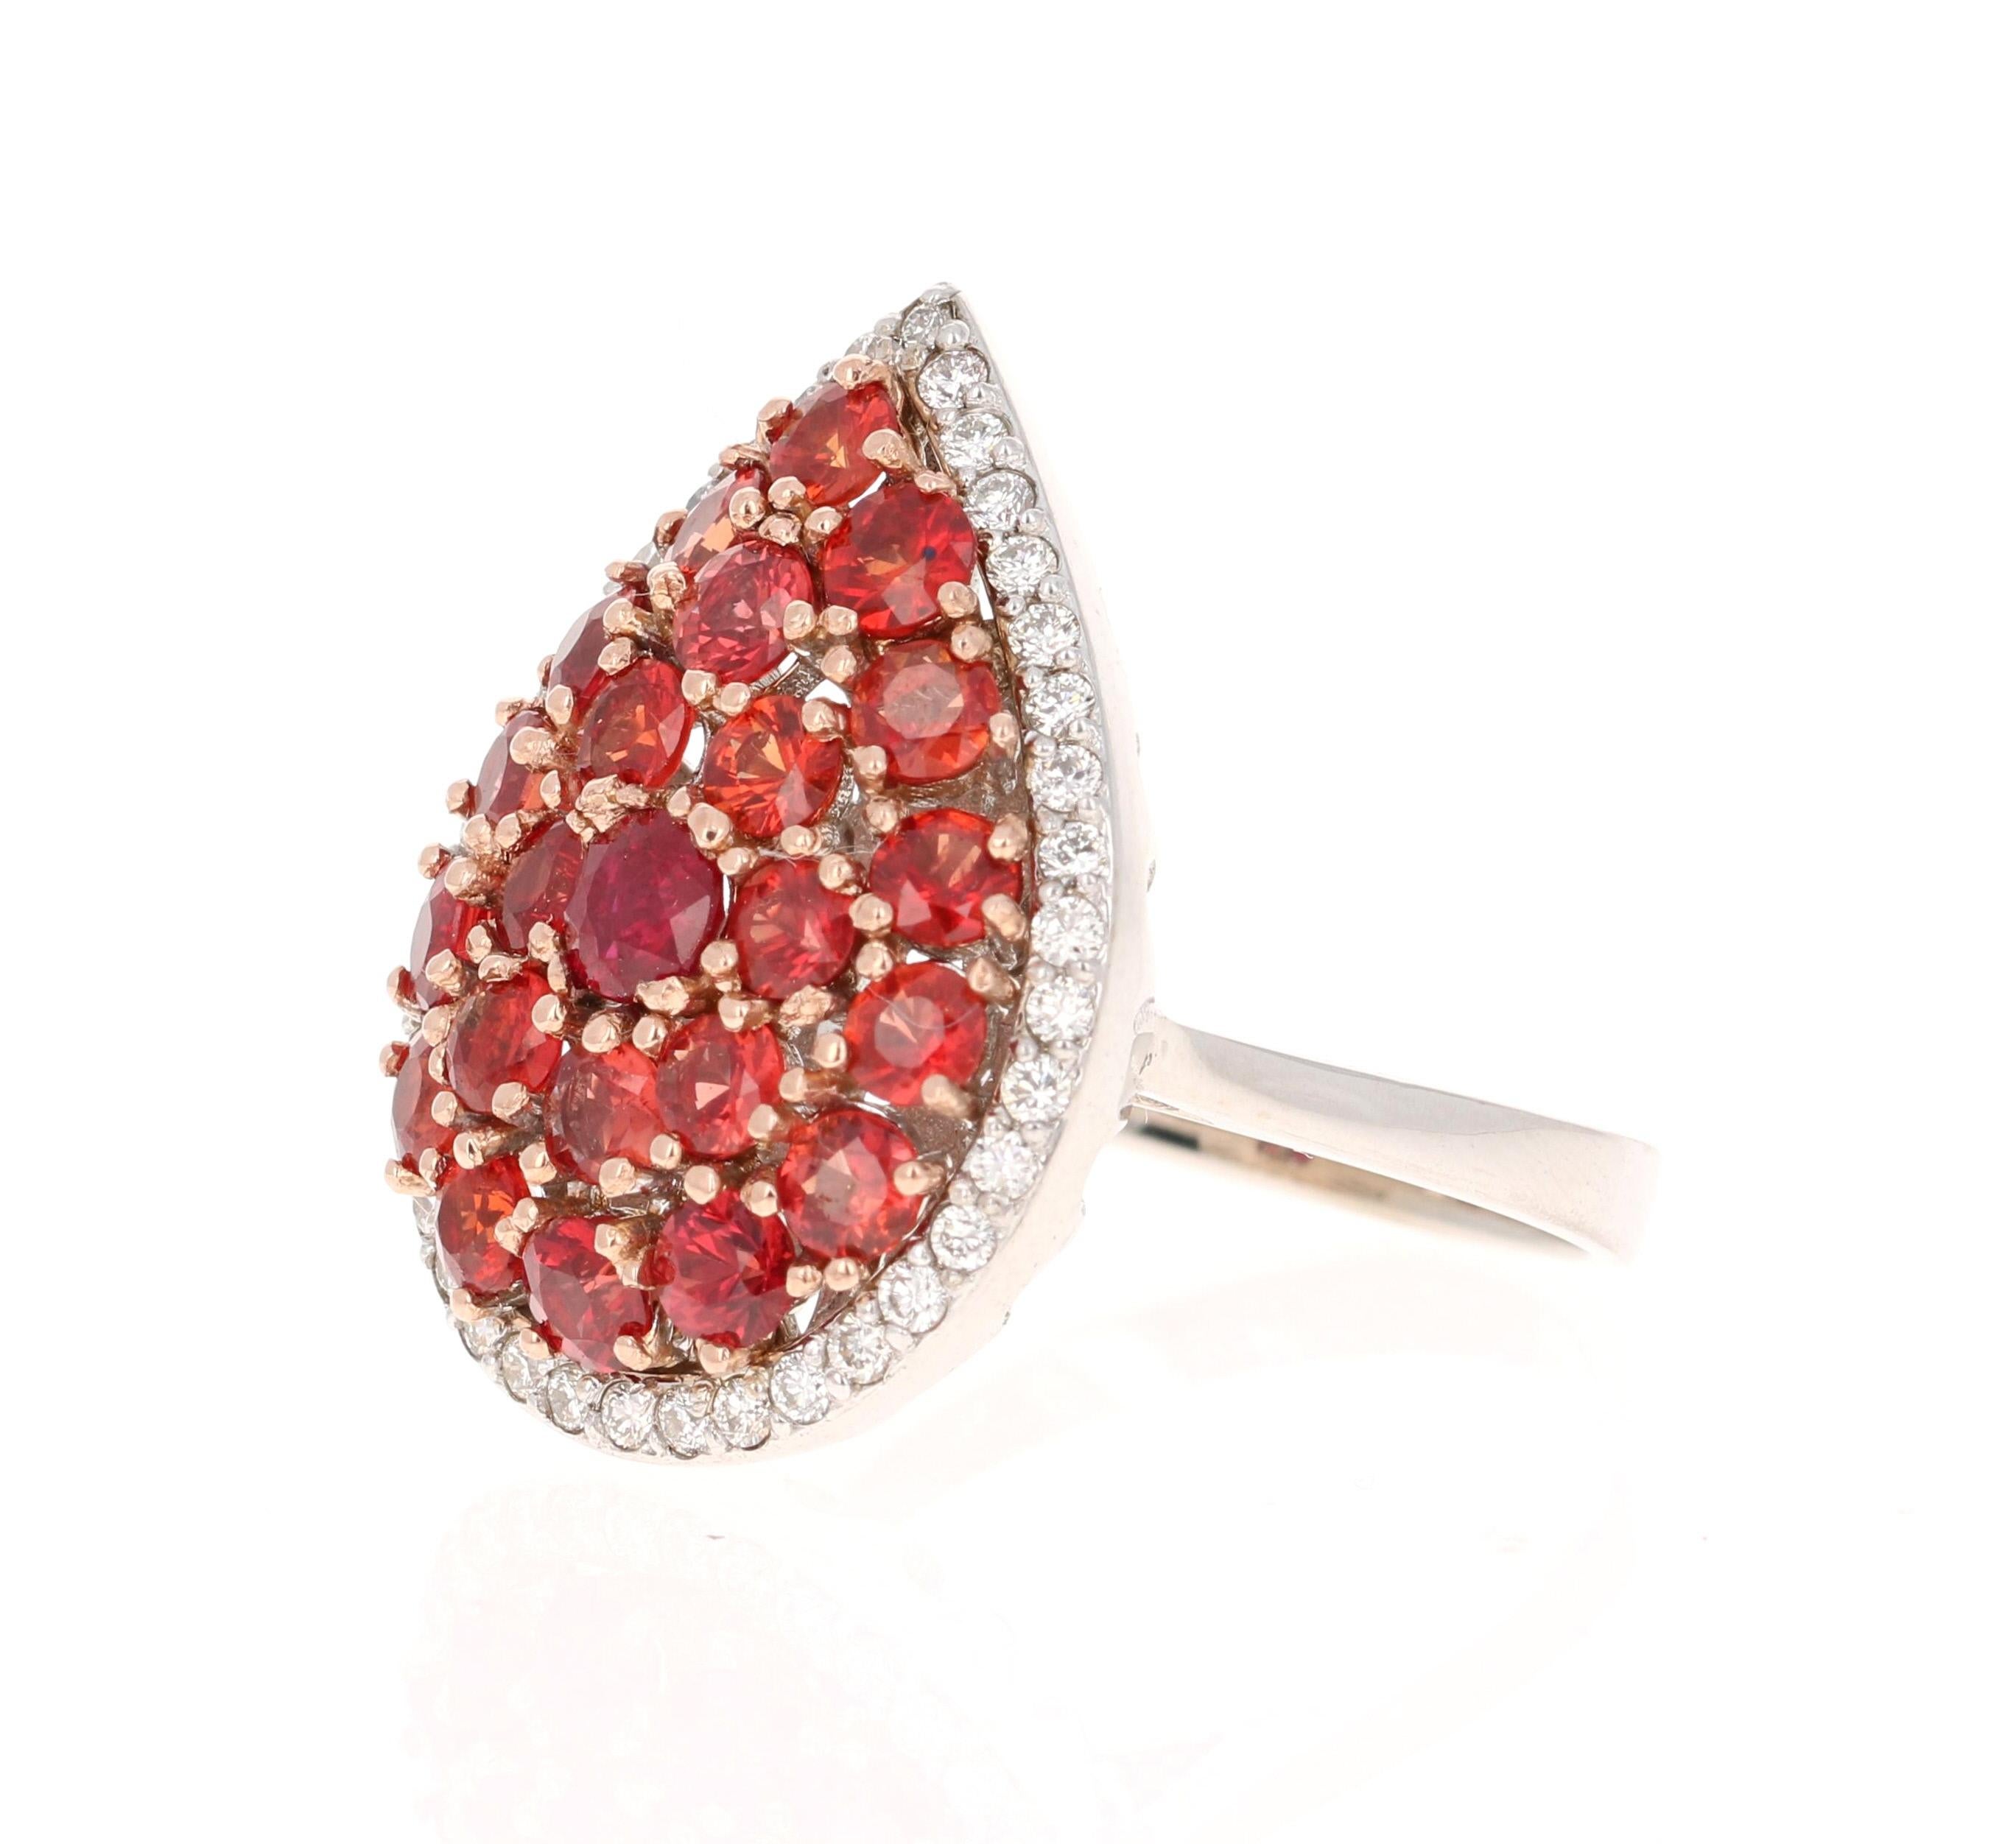 Contemporary 3.62 Carat Red Sapphire Diamond 14 Karat White Gold Cocktail Ring For Sale